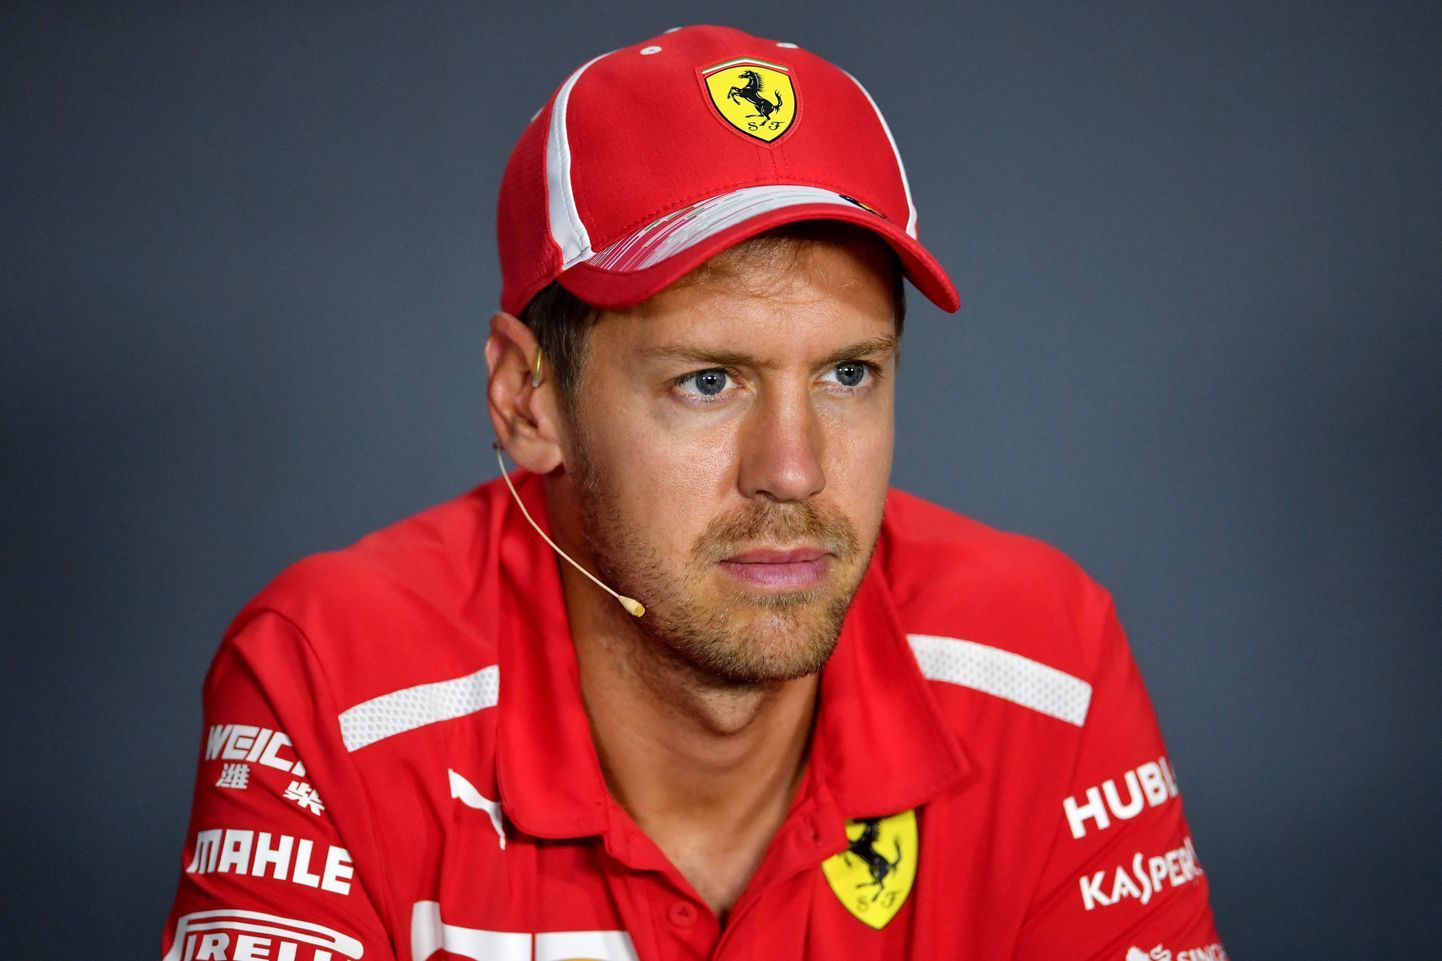 Ferrari's German driver Sebastian Vettel attends a press conference at the Autodromo Nazionale circuit in Monza on August 30, 2018 ahead of the Italian Formula One Grand Prix. (Photo by ANDREJ ISAKOVIC / AFP)